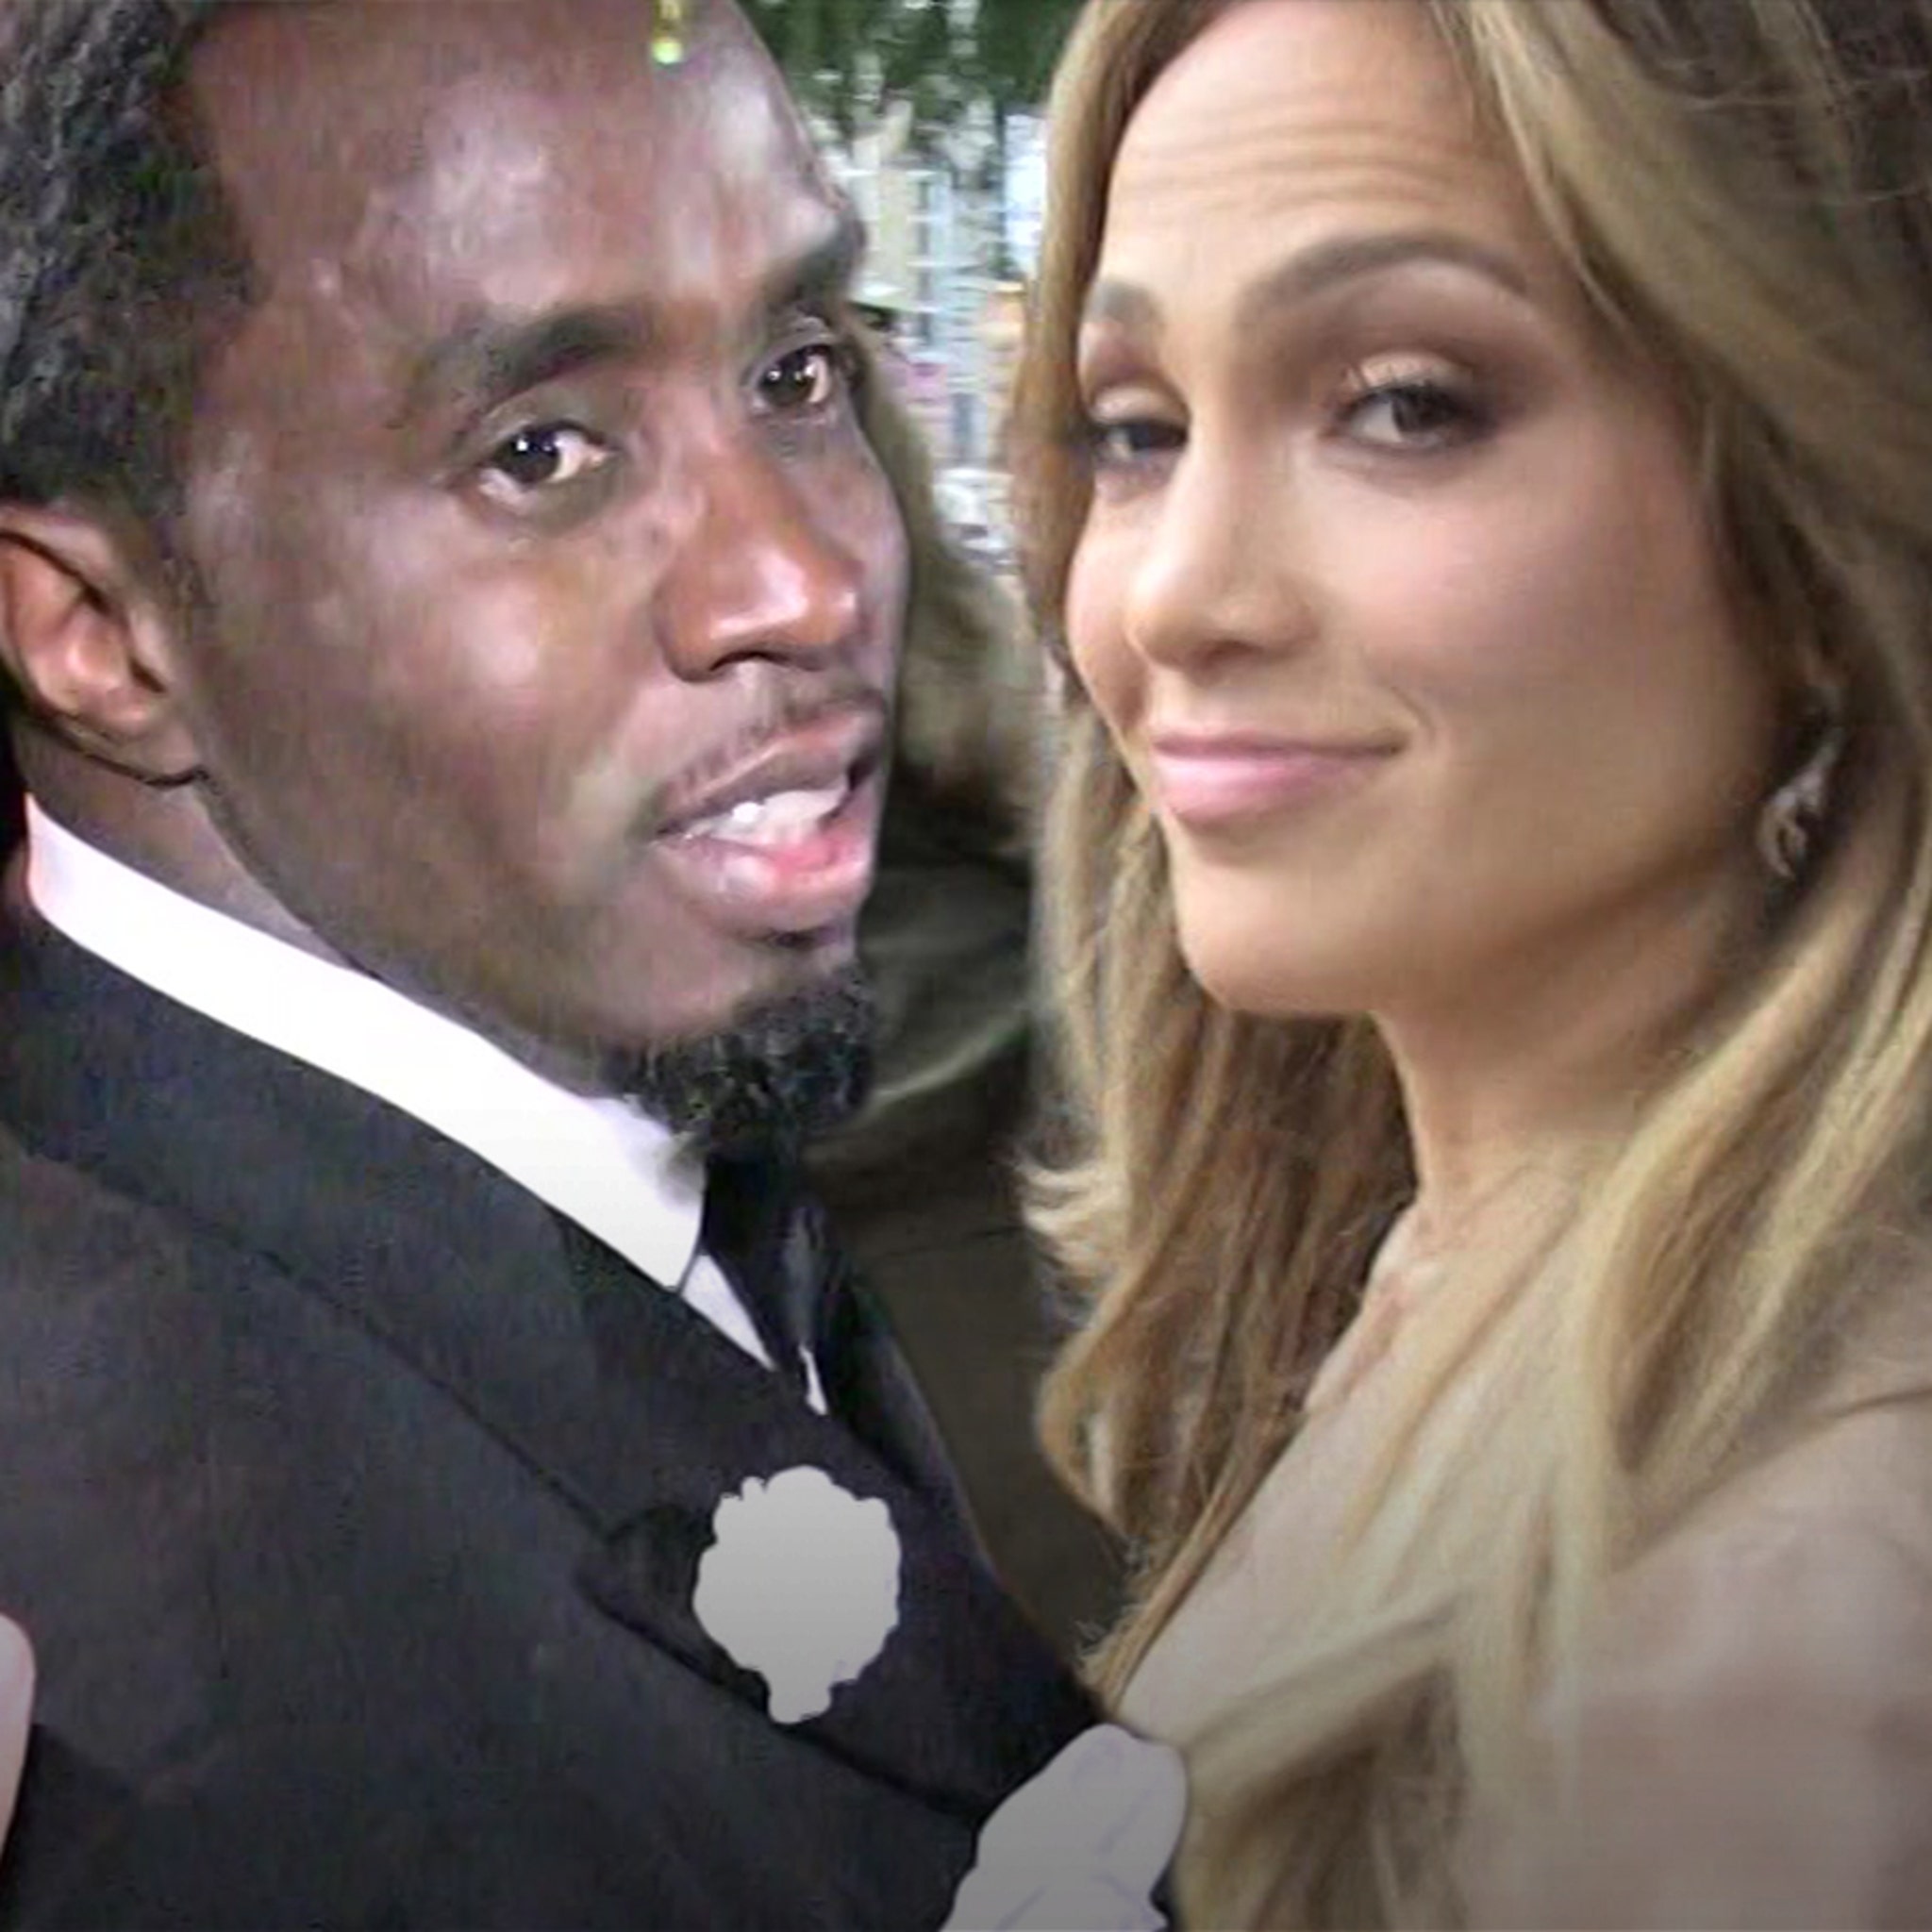 Jlo And Puff Daddy Married